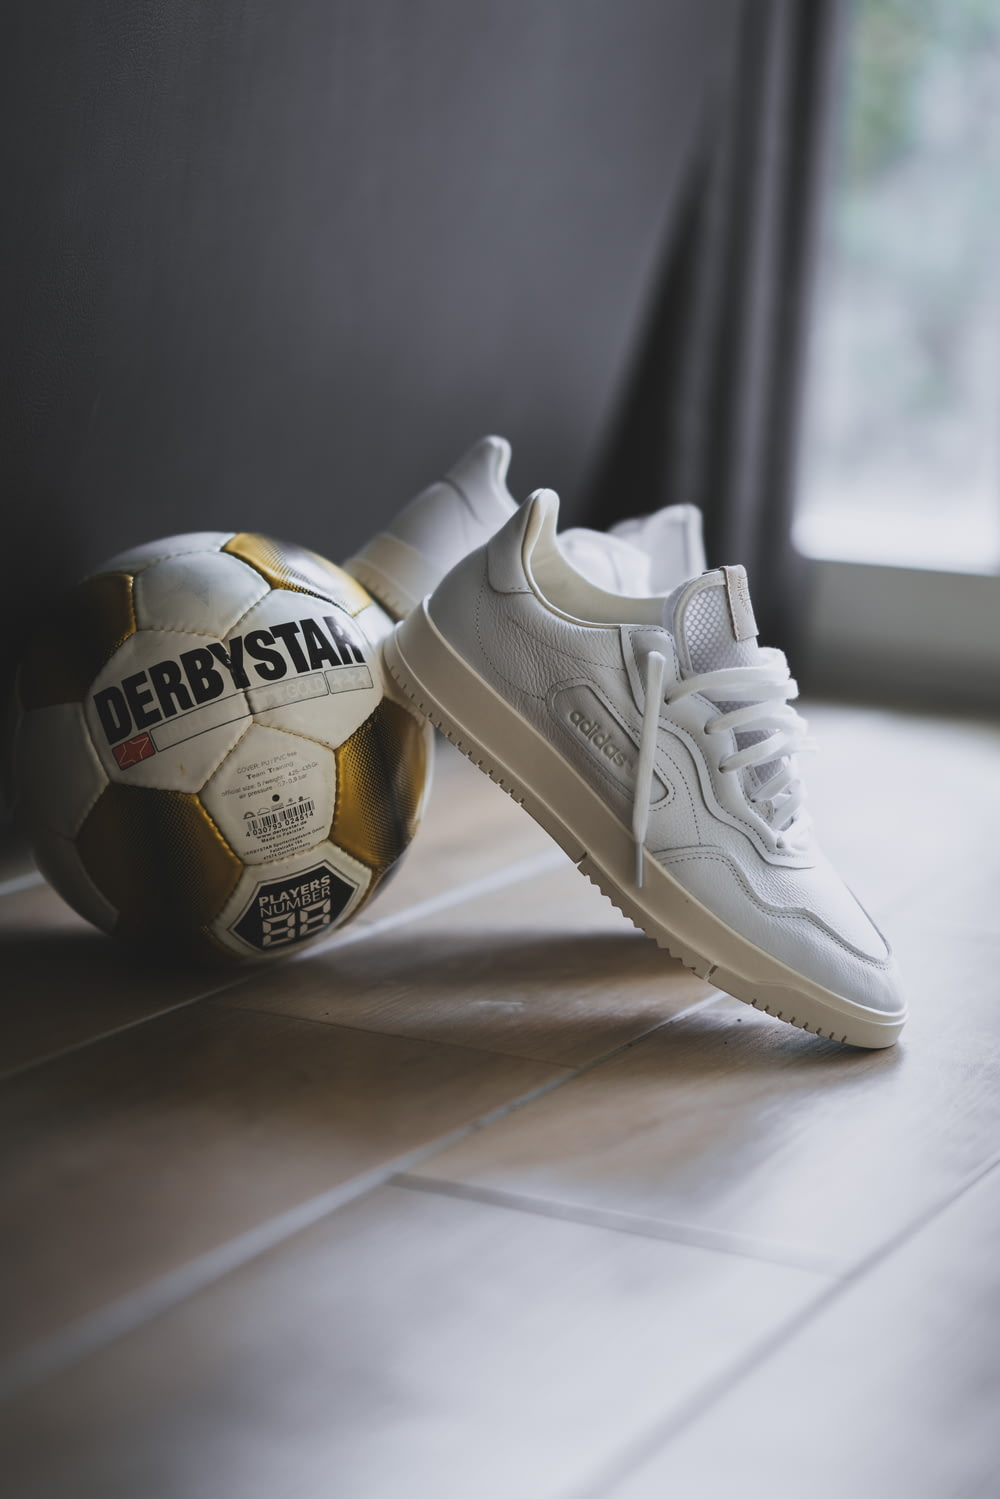 pair of white Adidas low-top sneakers beside Derbystar soccer ball